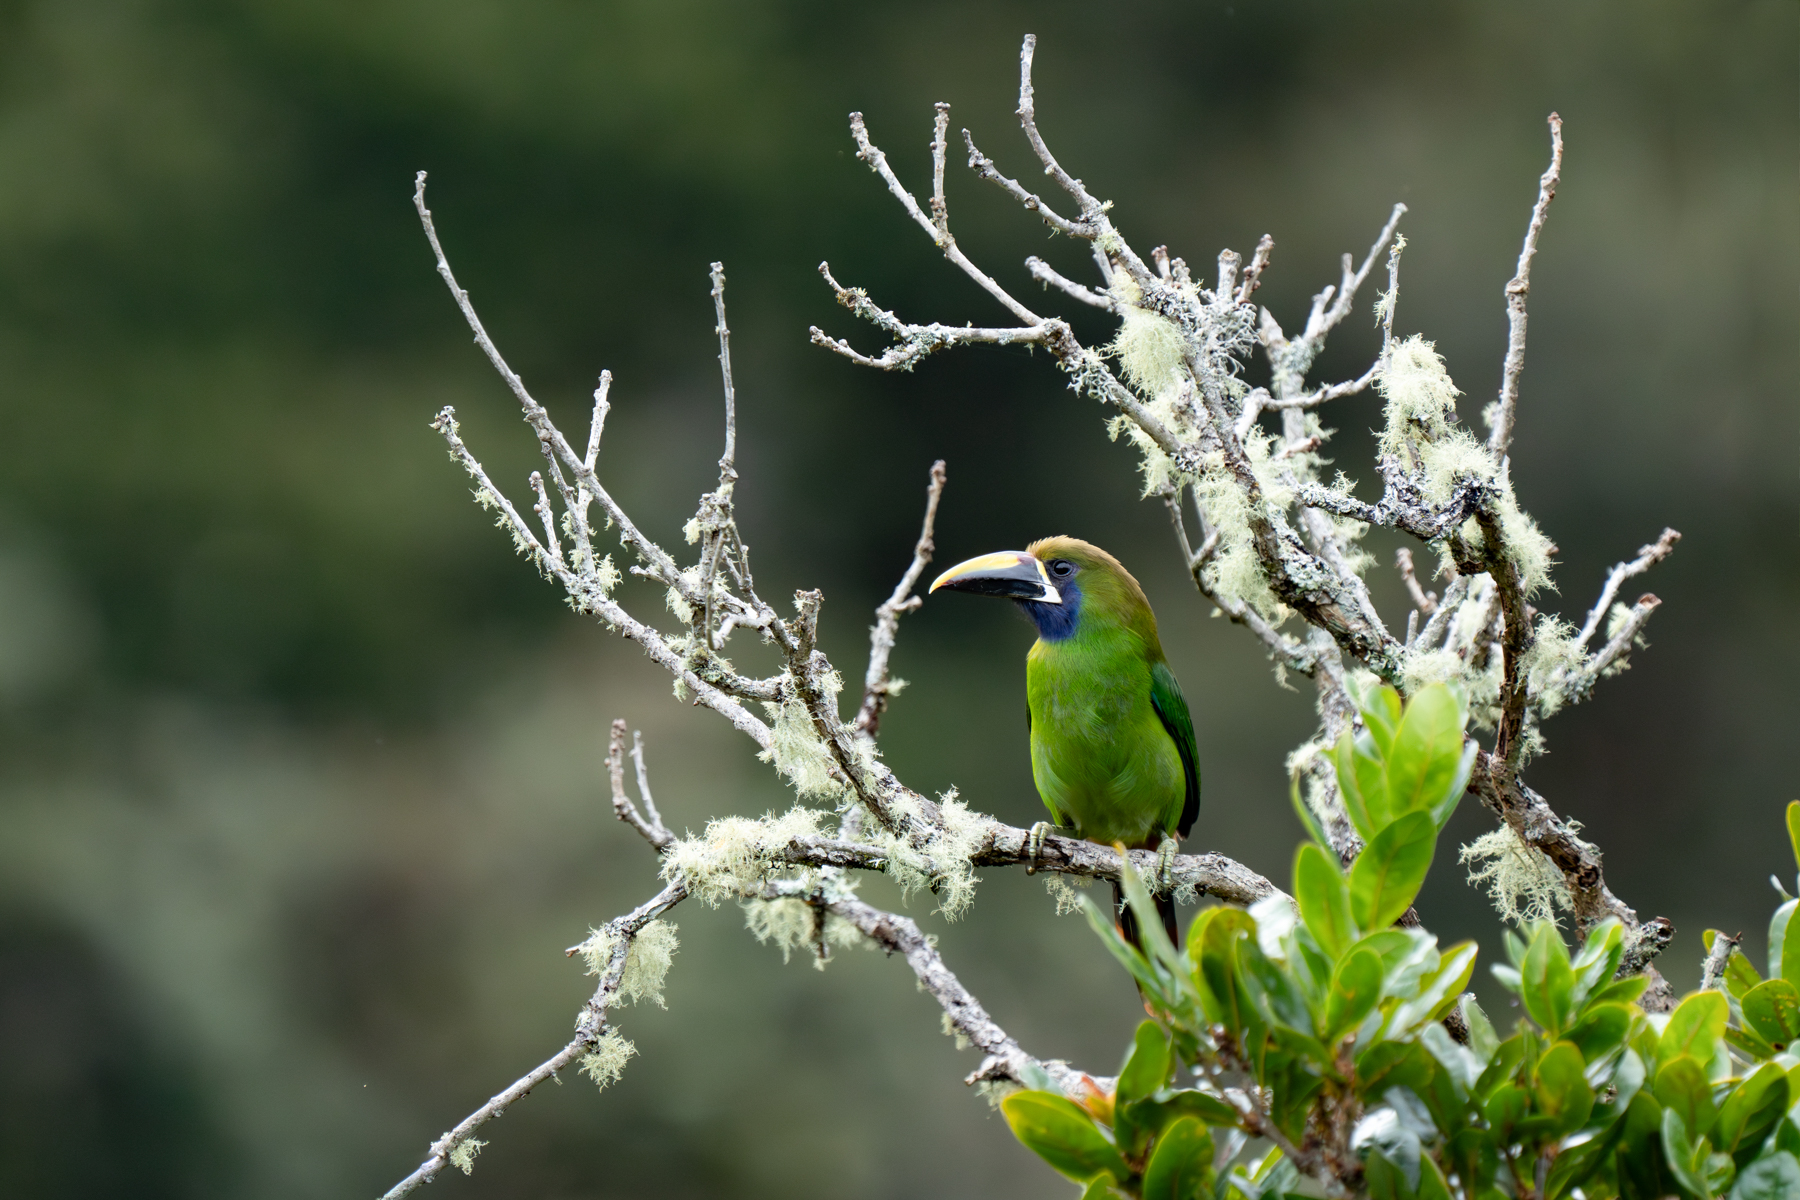 A bird of the middle and high altitudes in Costa Rica, Emerald Toucanets love lichen covered branches (image by Inger Vandyke)